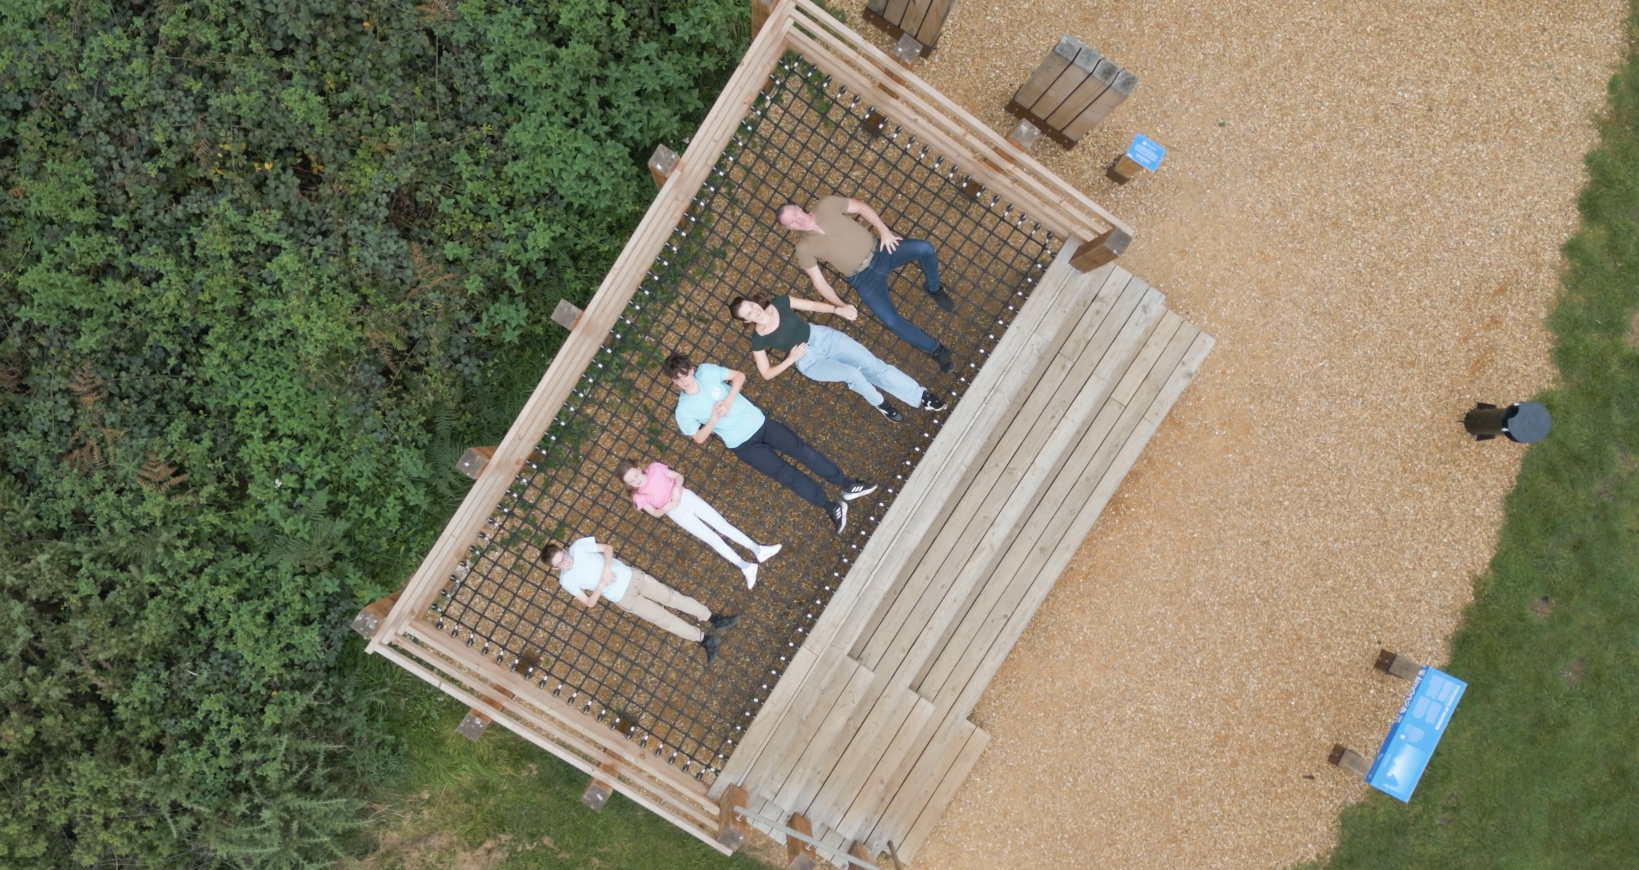 An aerial view of a group of people laying on a wooden platform.